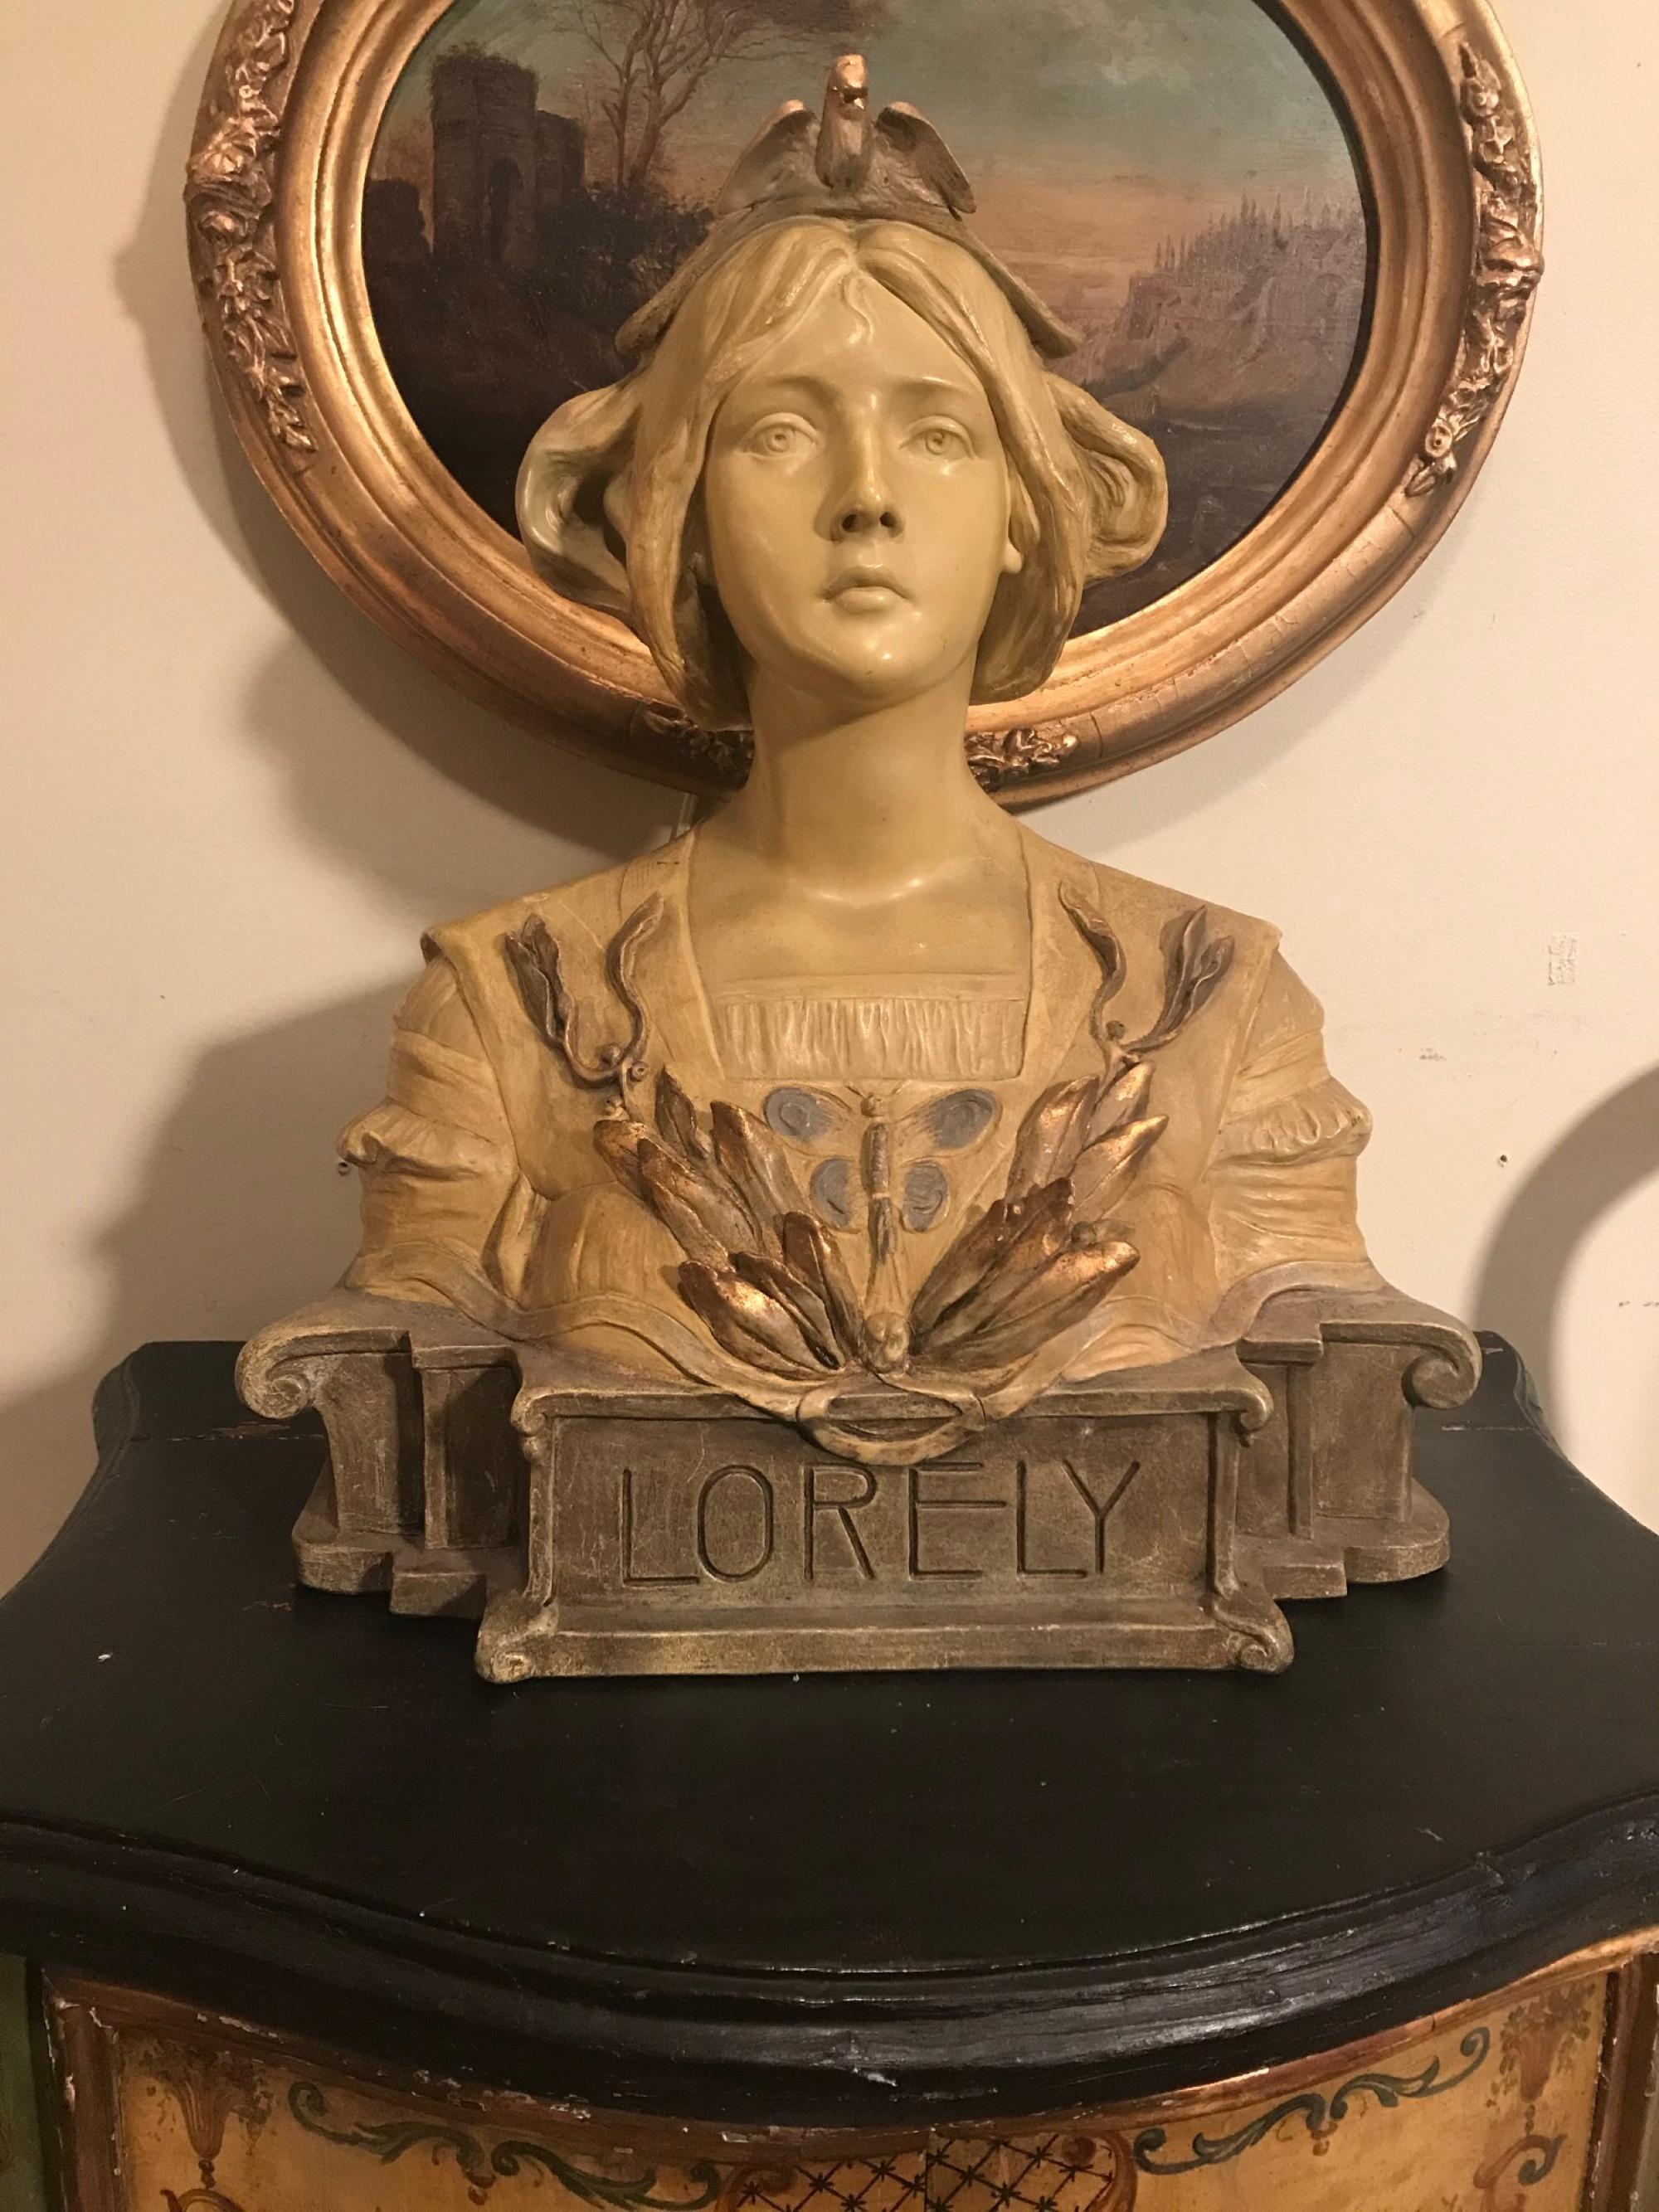 Antique Austrian Goldscheider terracotta bust of Lorely, circa 1900

This is a superb and large Art Nouveau polychrome painted terracotta bust of the German river maiden, ‘Lorely” (Lorelei). This rare bust was created and modeled by the sculptor,